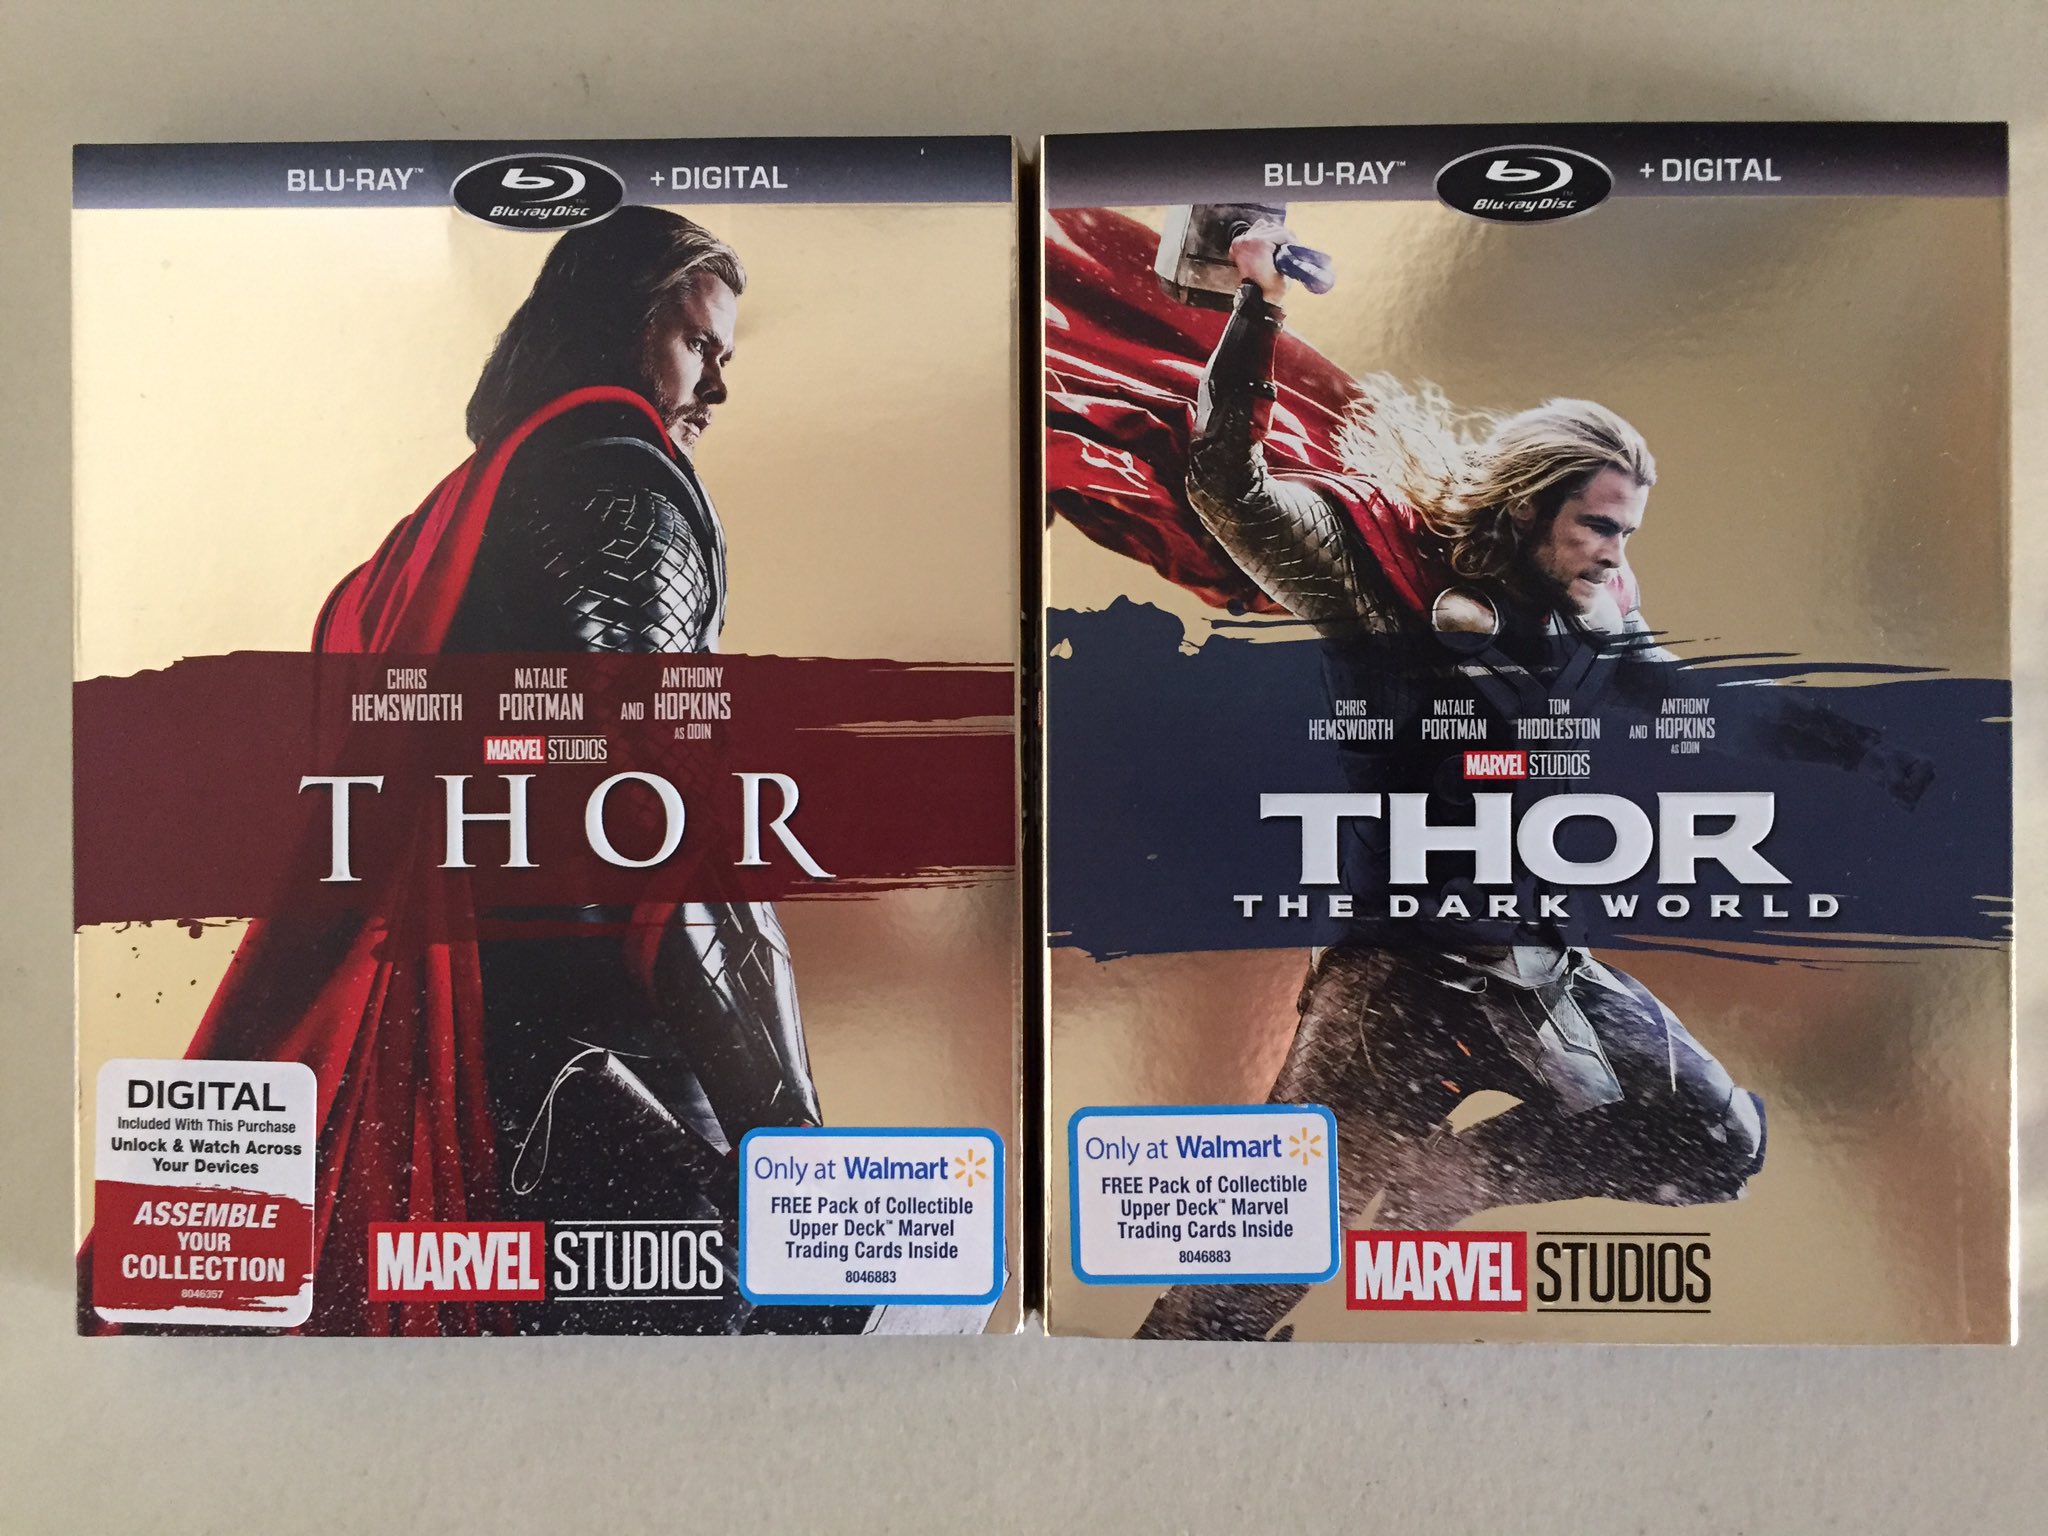 NEW UPPER DECK MARVEL TRADING CARDS 5 CARDS PER PACK WALMART EXCLUSIVE COMMEMORA 